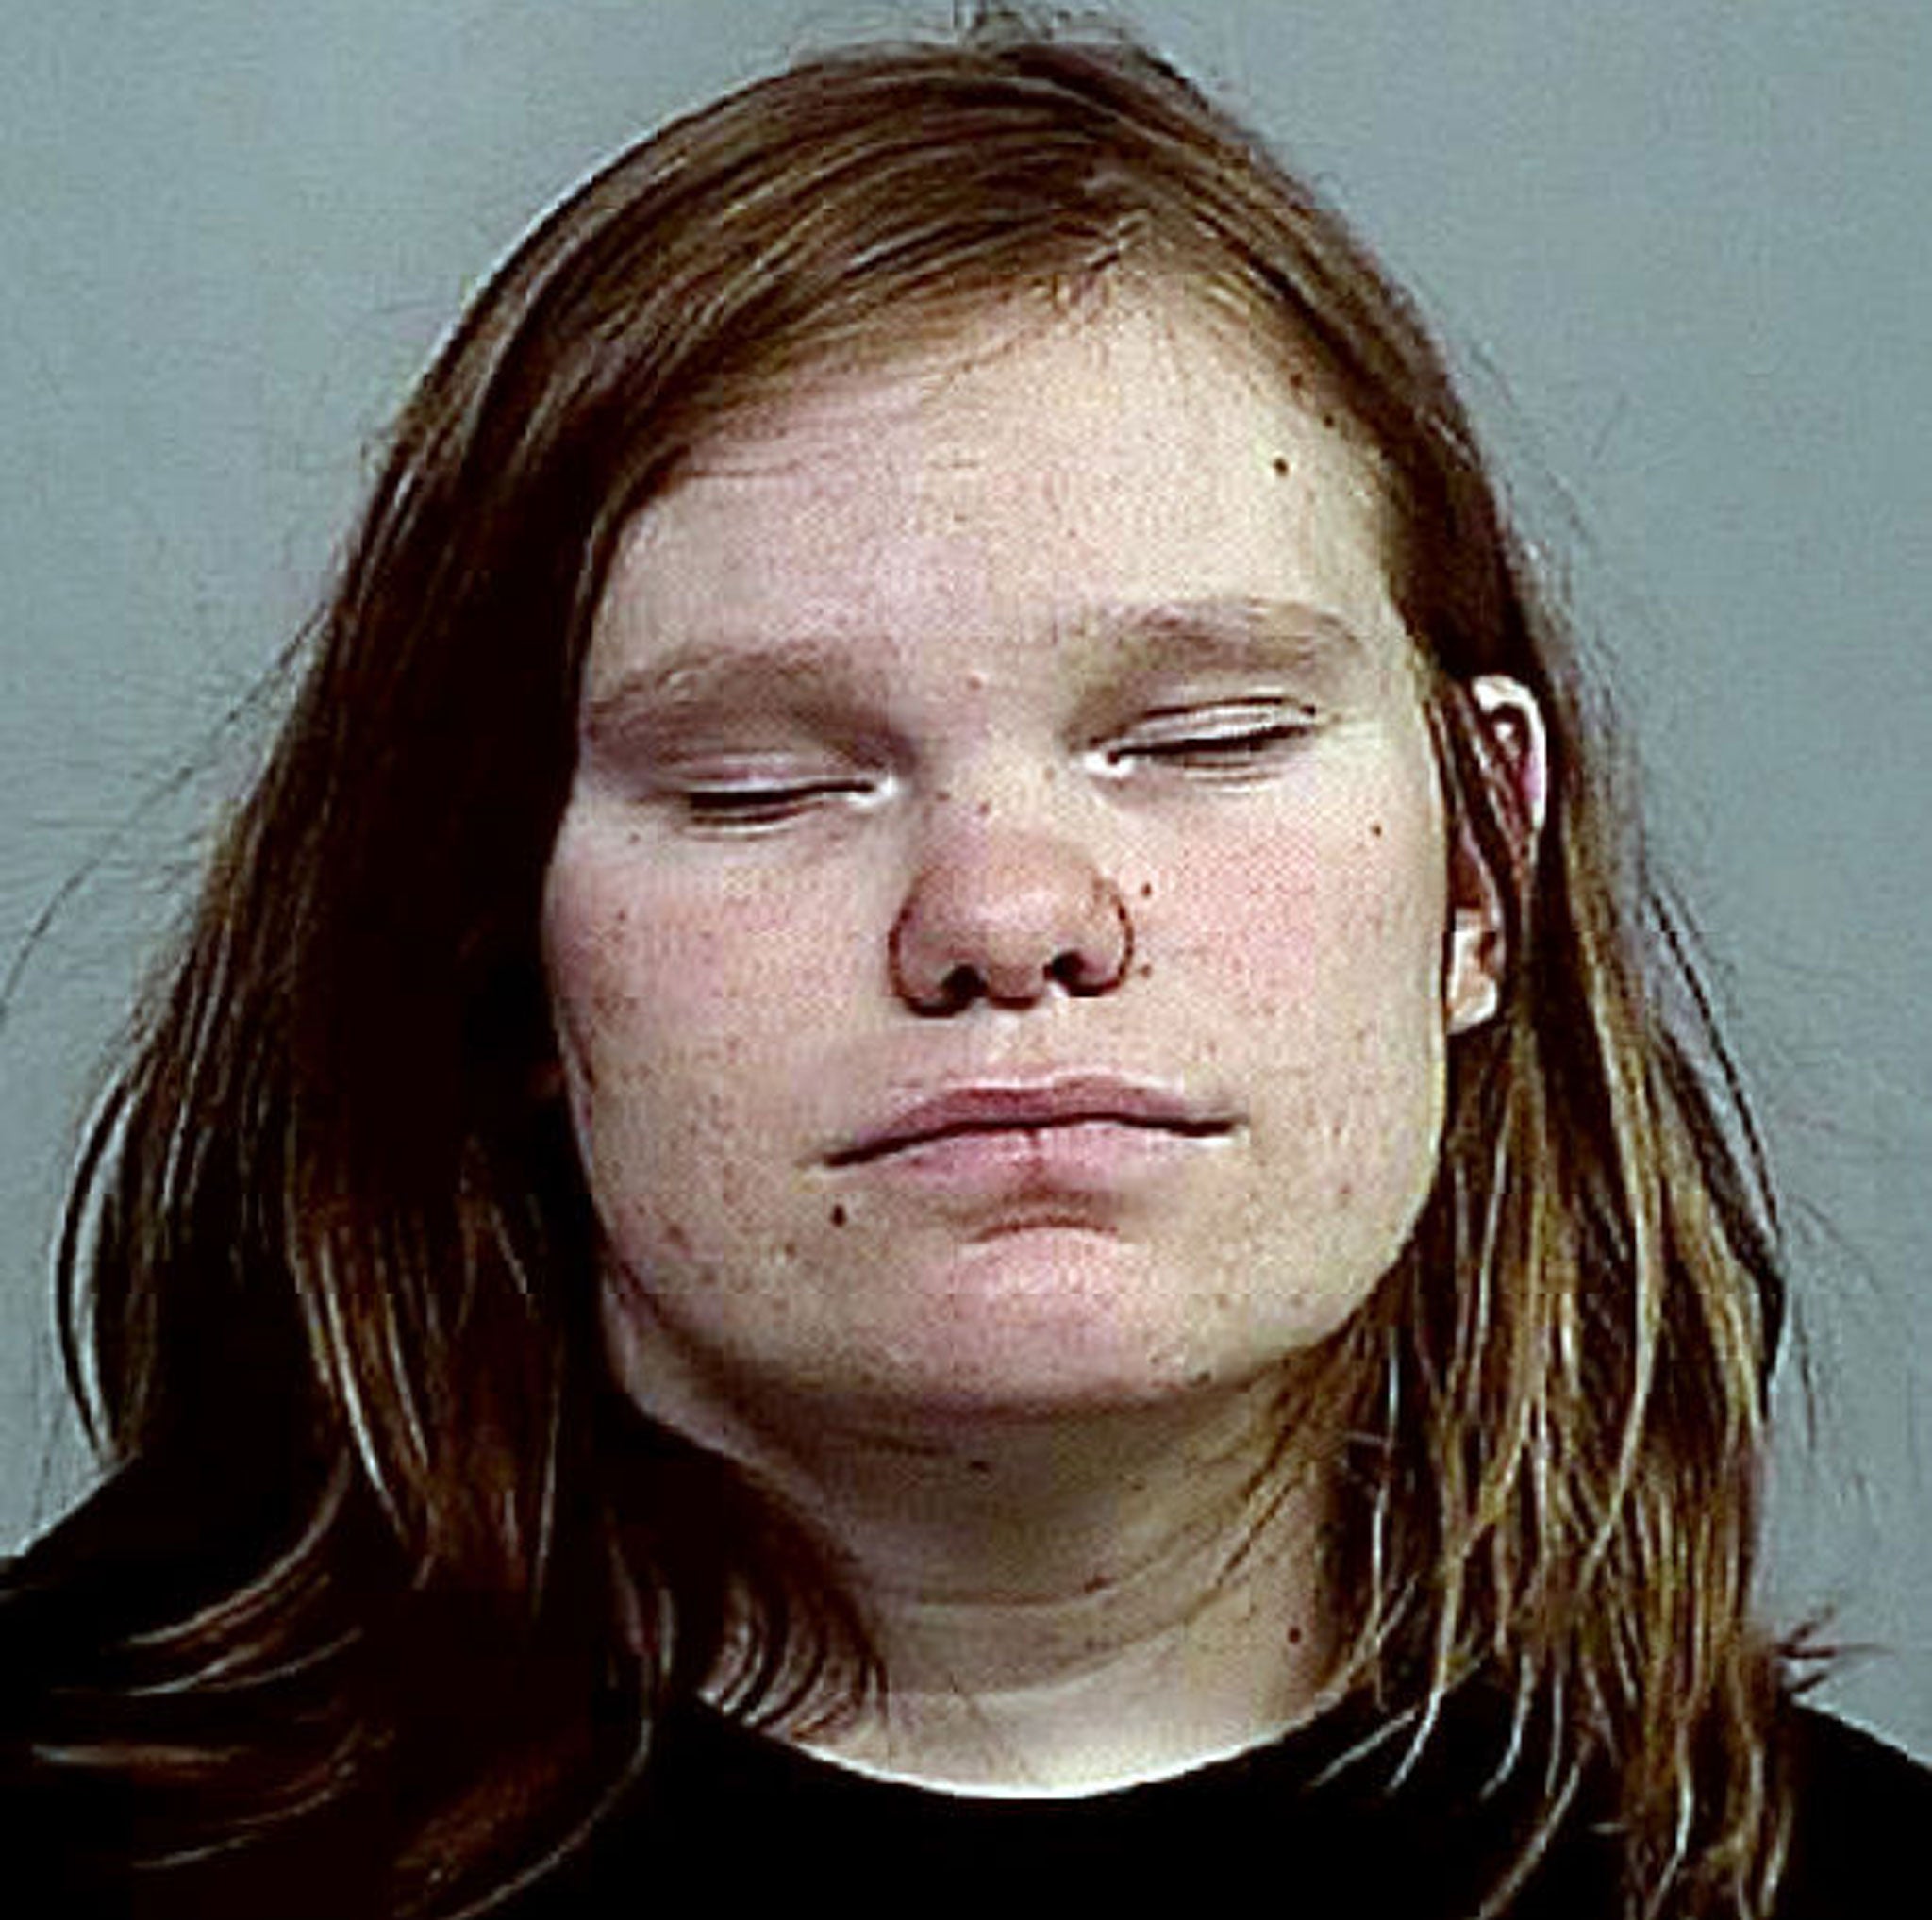 Police say Carly Marra was arrested and charged after she allegedly stabbed a teddy bear and got into a fight with on-off boyfriend Jordan McAlexander